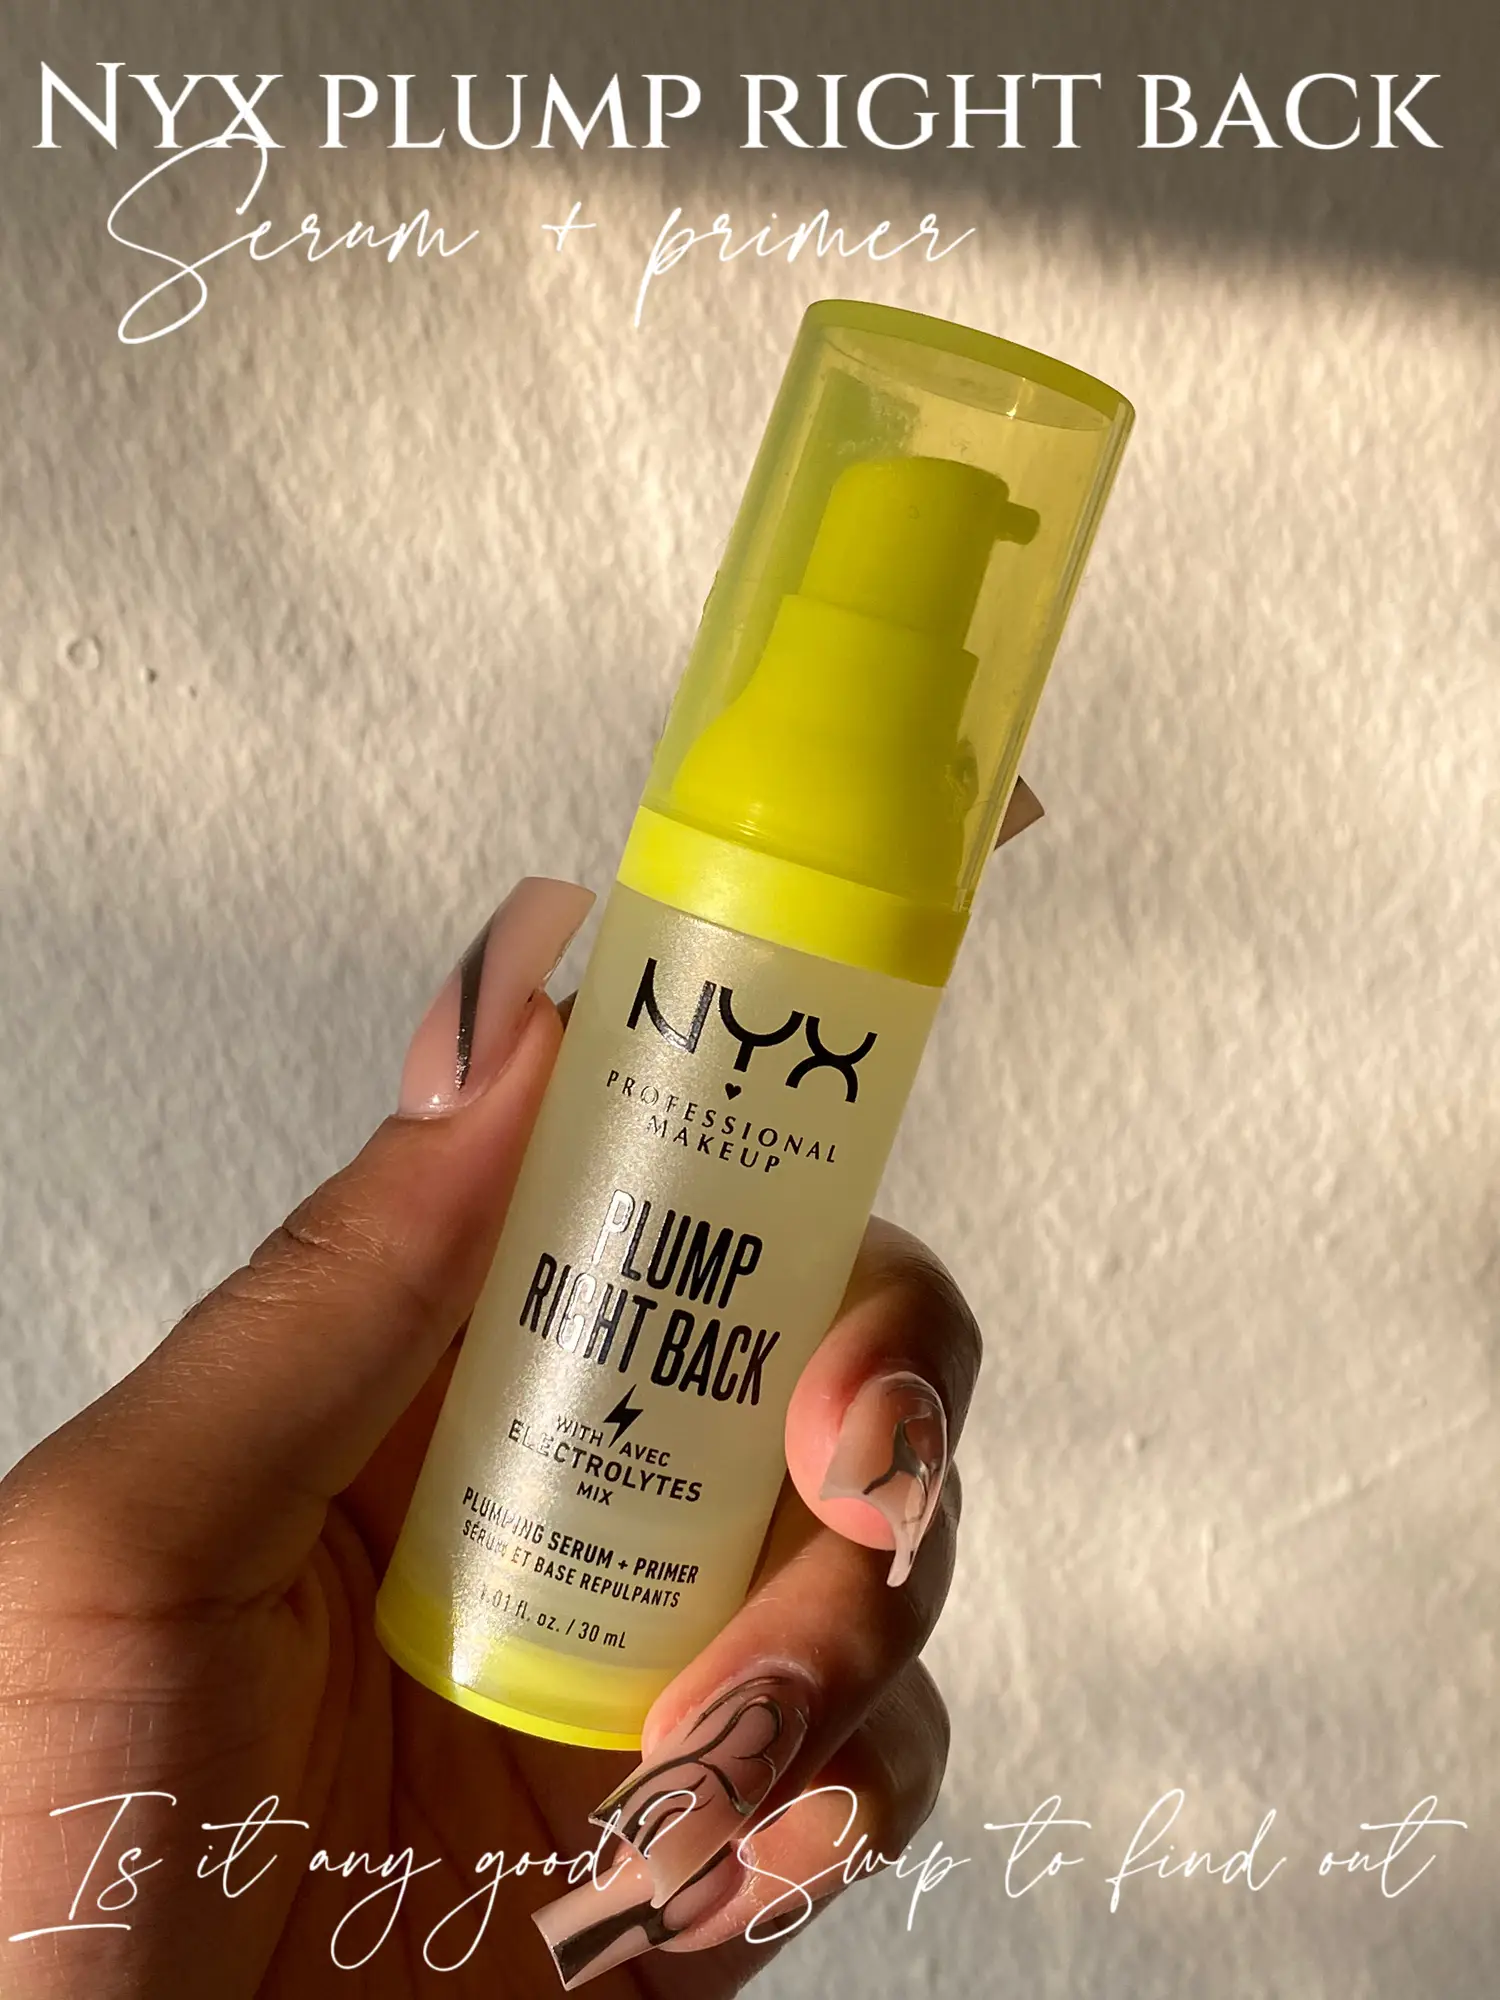 Nyx plumping primer review | Lemon8 Kenyasterling Gallery by posted 